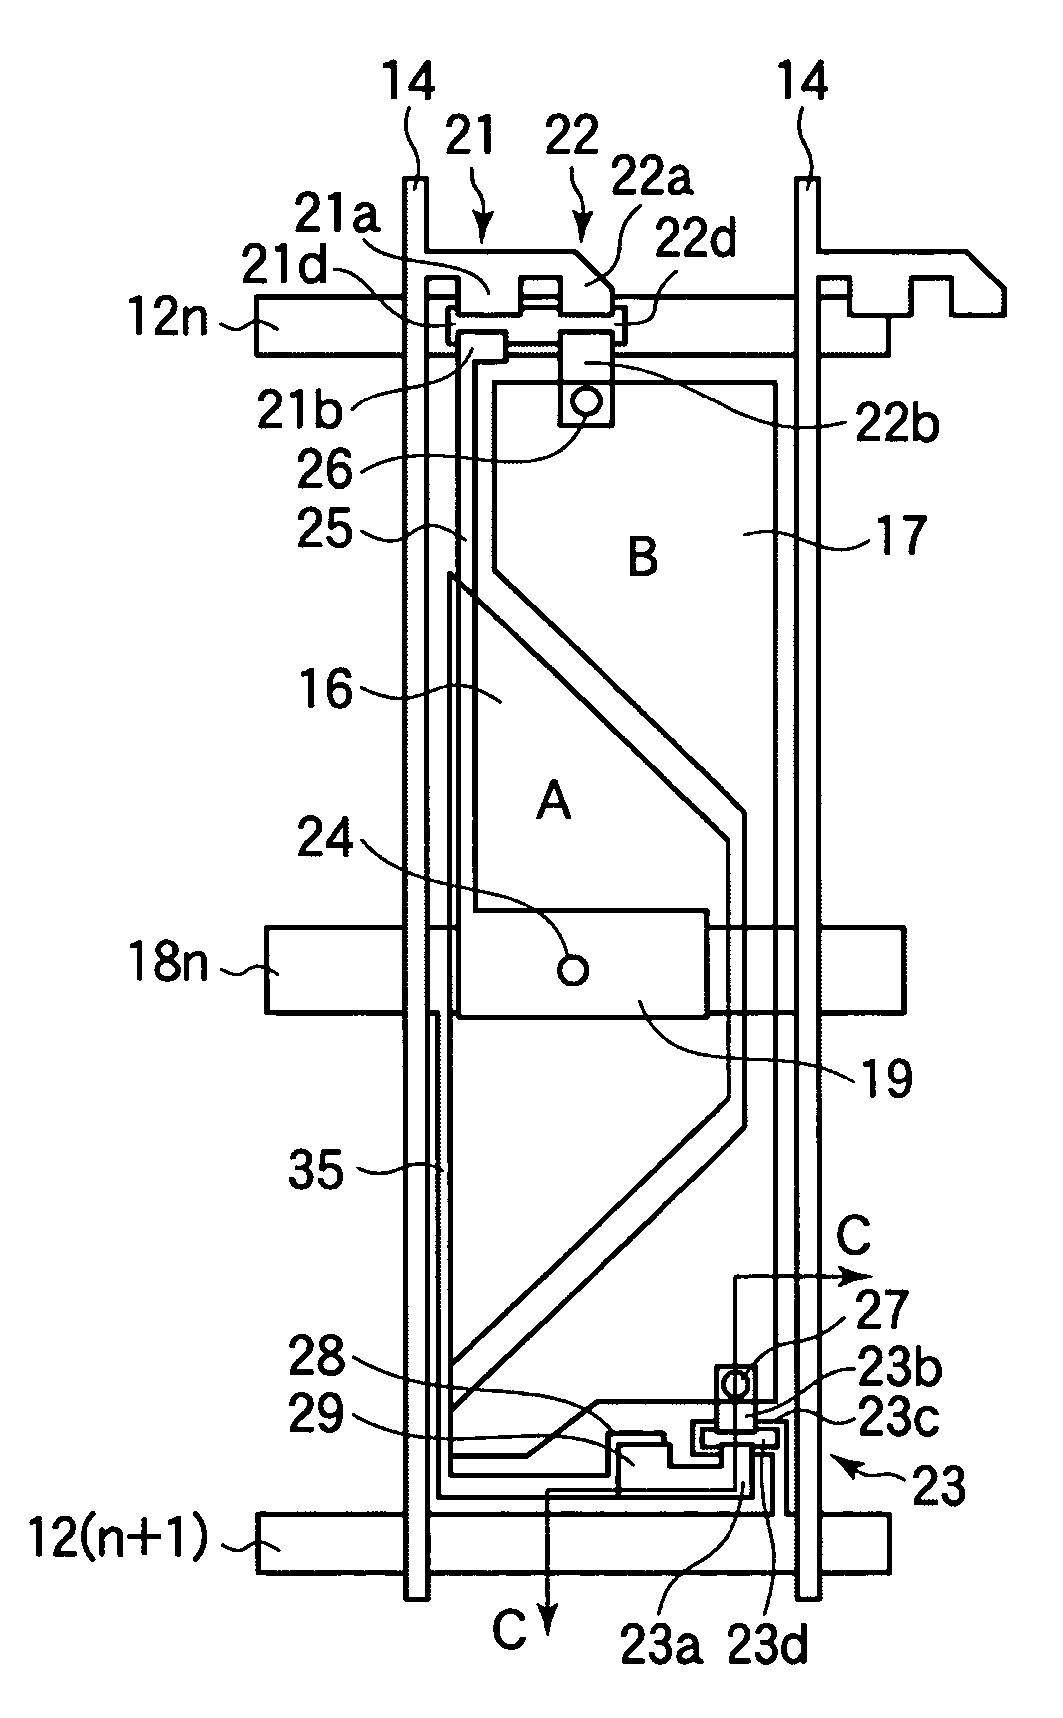 Liquid crystal display device with a buffer capacitor electrode disposed in a non-pixel electrode region